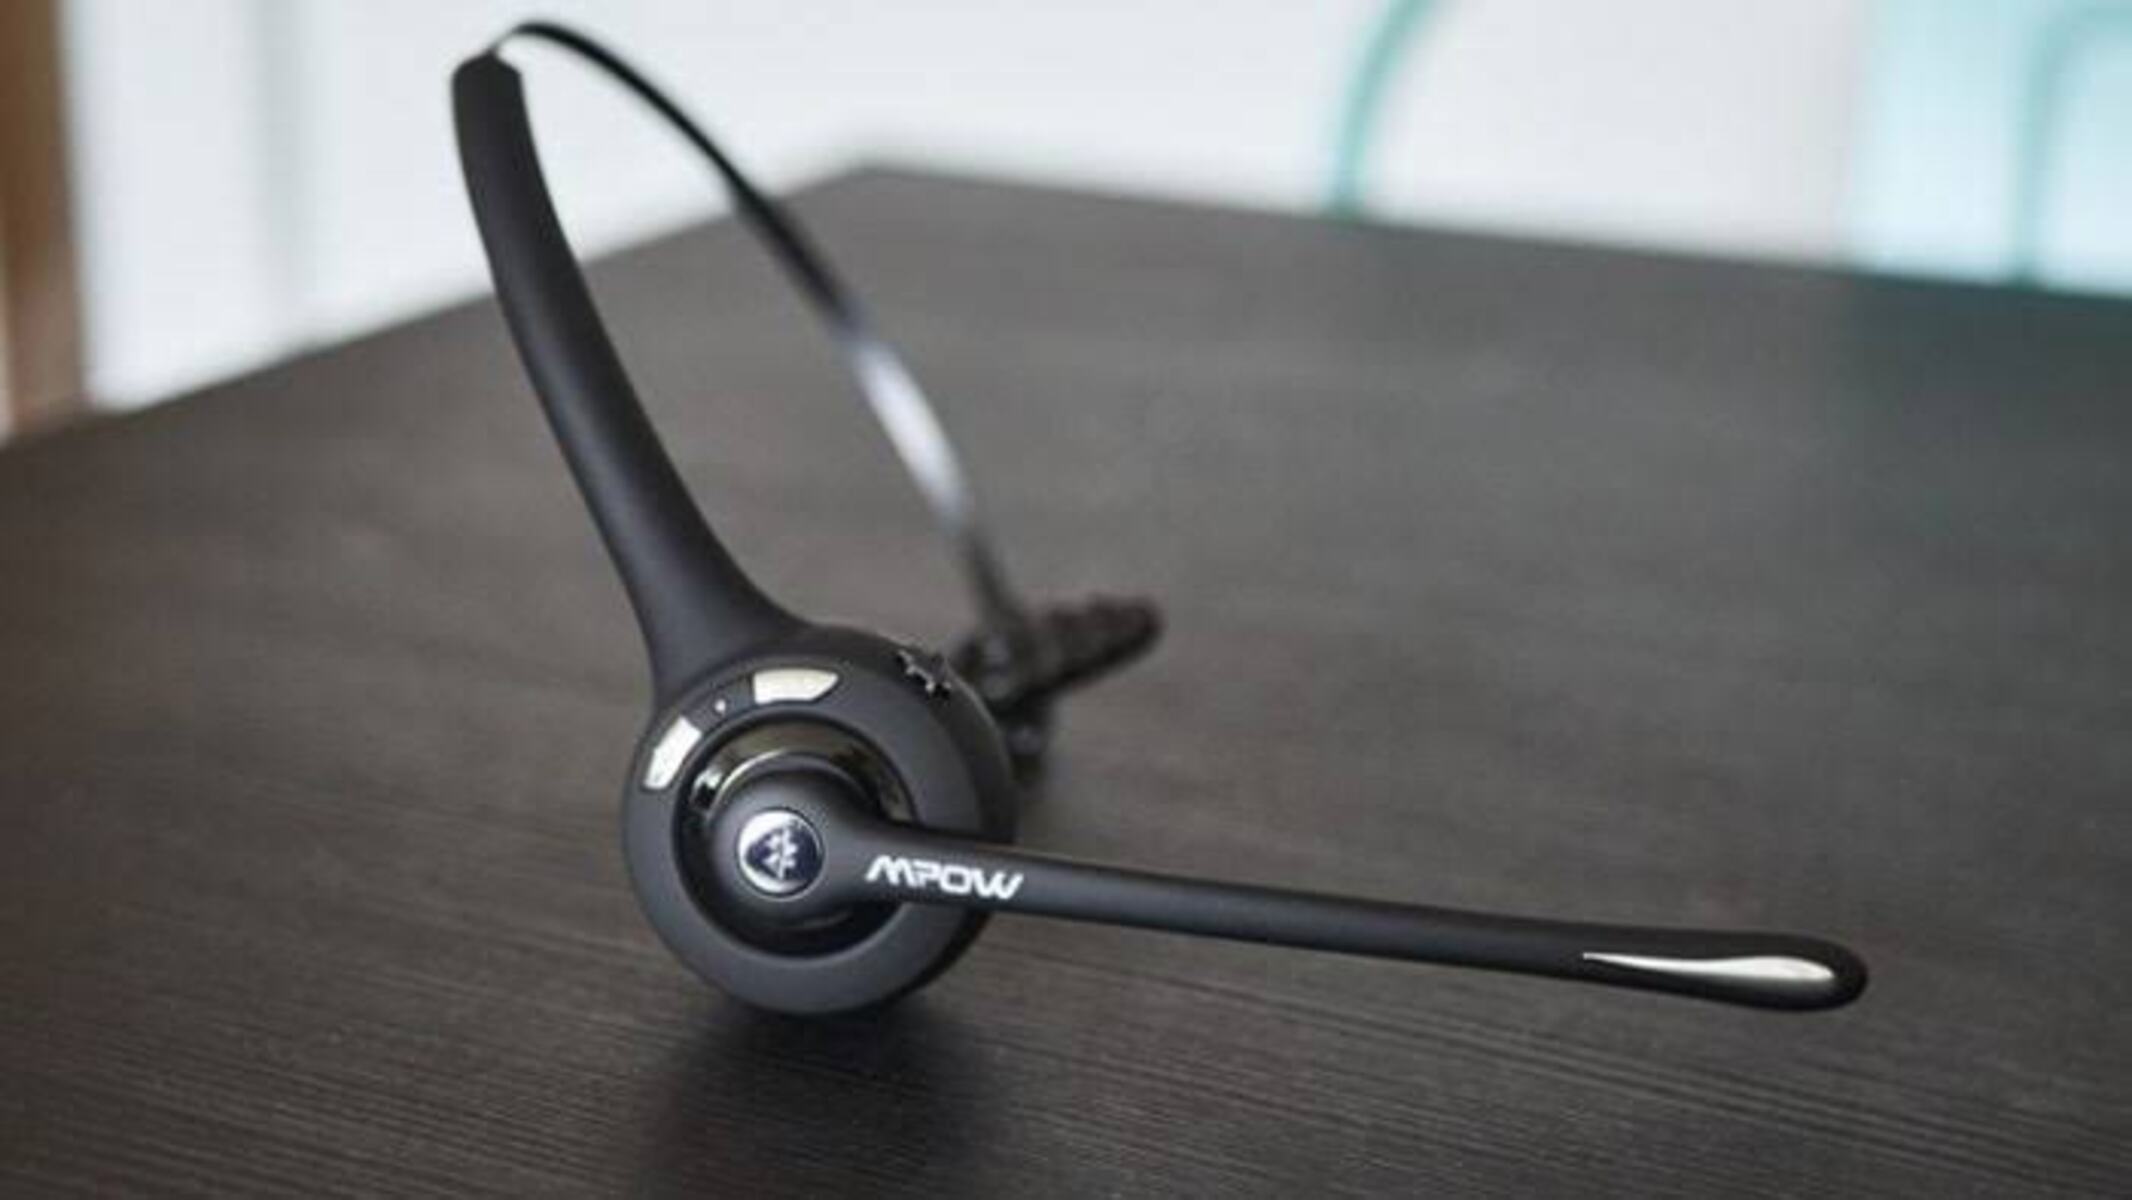 mpow-pro-trucker-bluetooth-headset-review-calls-on-the-go-for-less